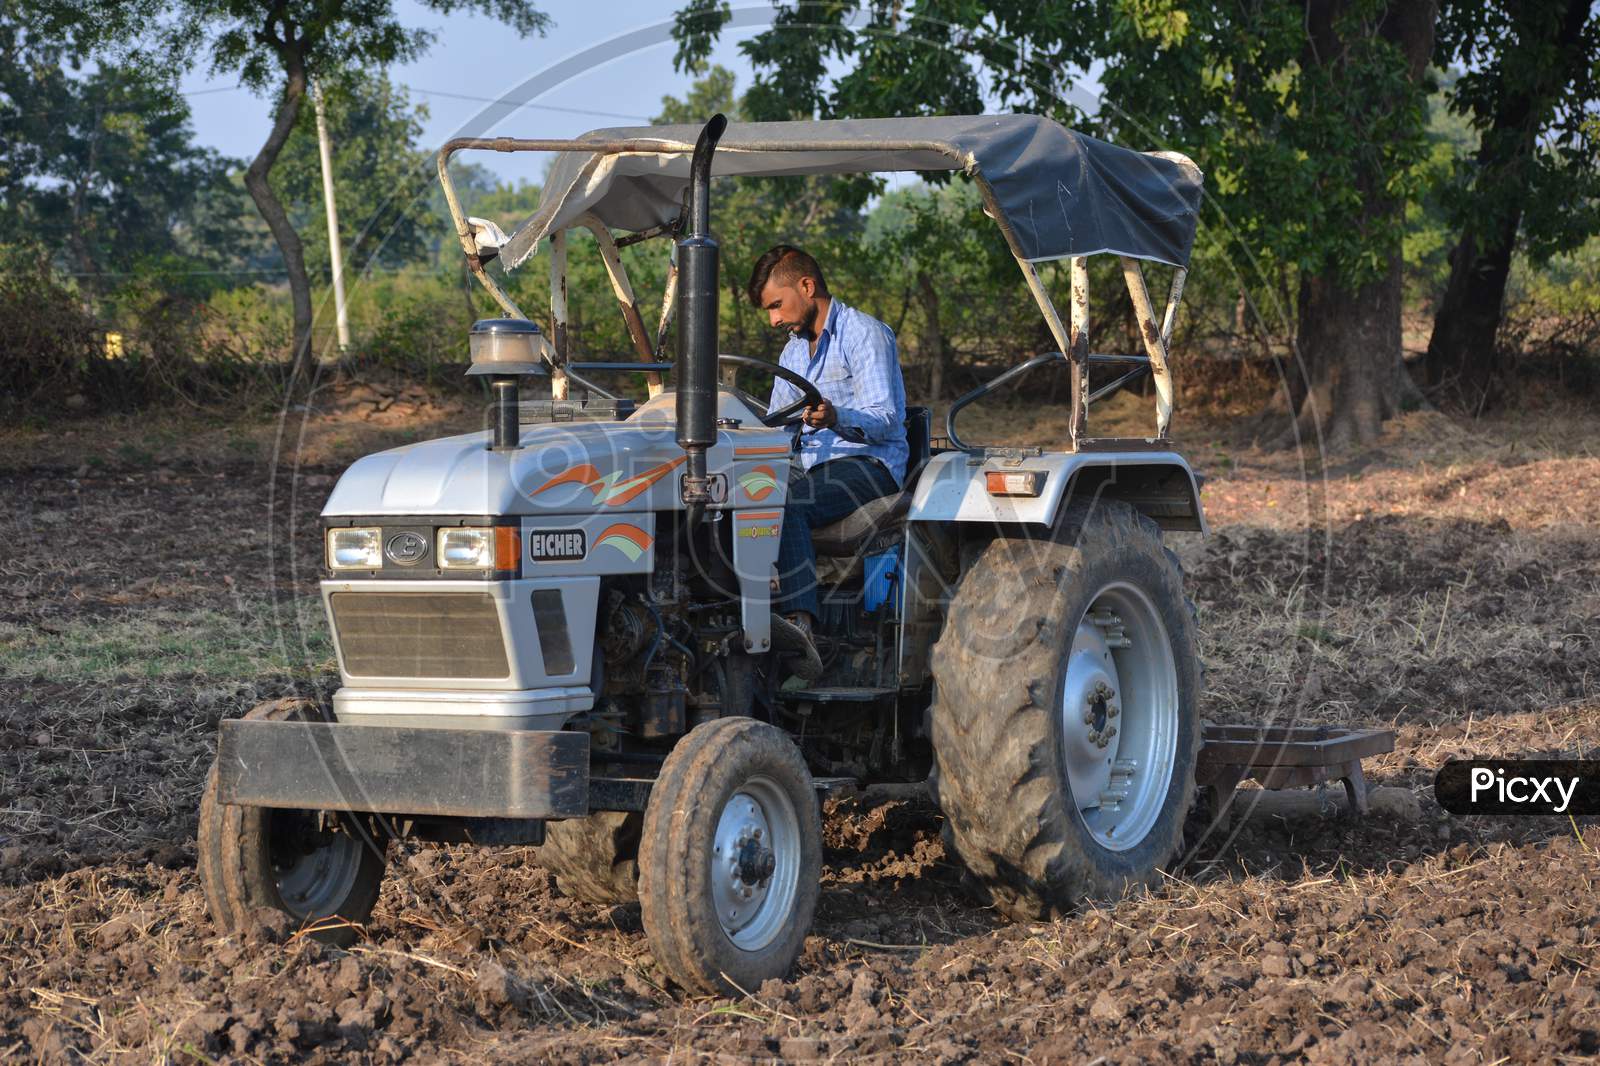 TIKAMGARH, MADHYA PRADESH, INDIA - NOVEMBER 24, 2020: Indian farmer with tractor preparing land for sowing with harrow.